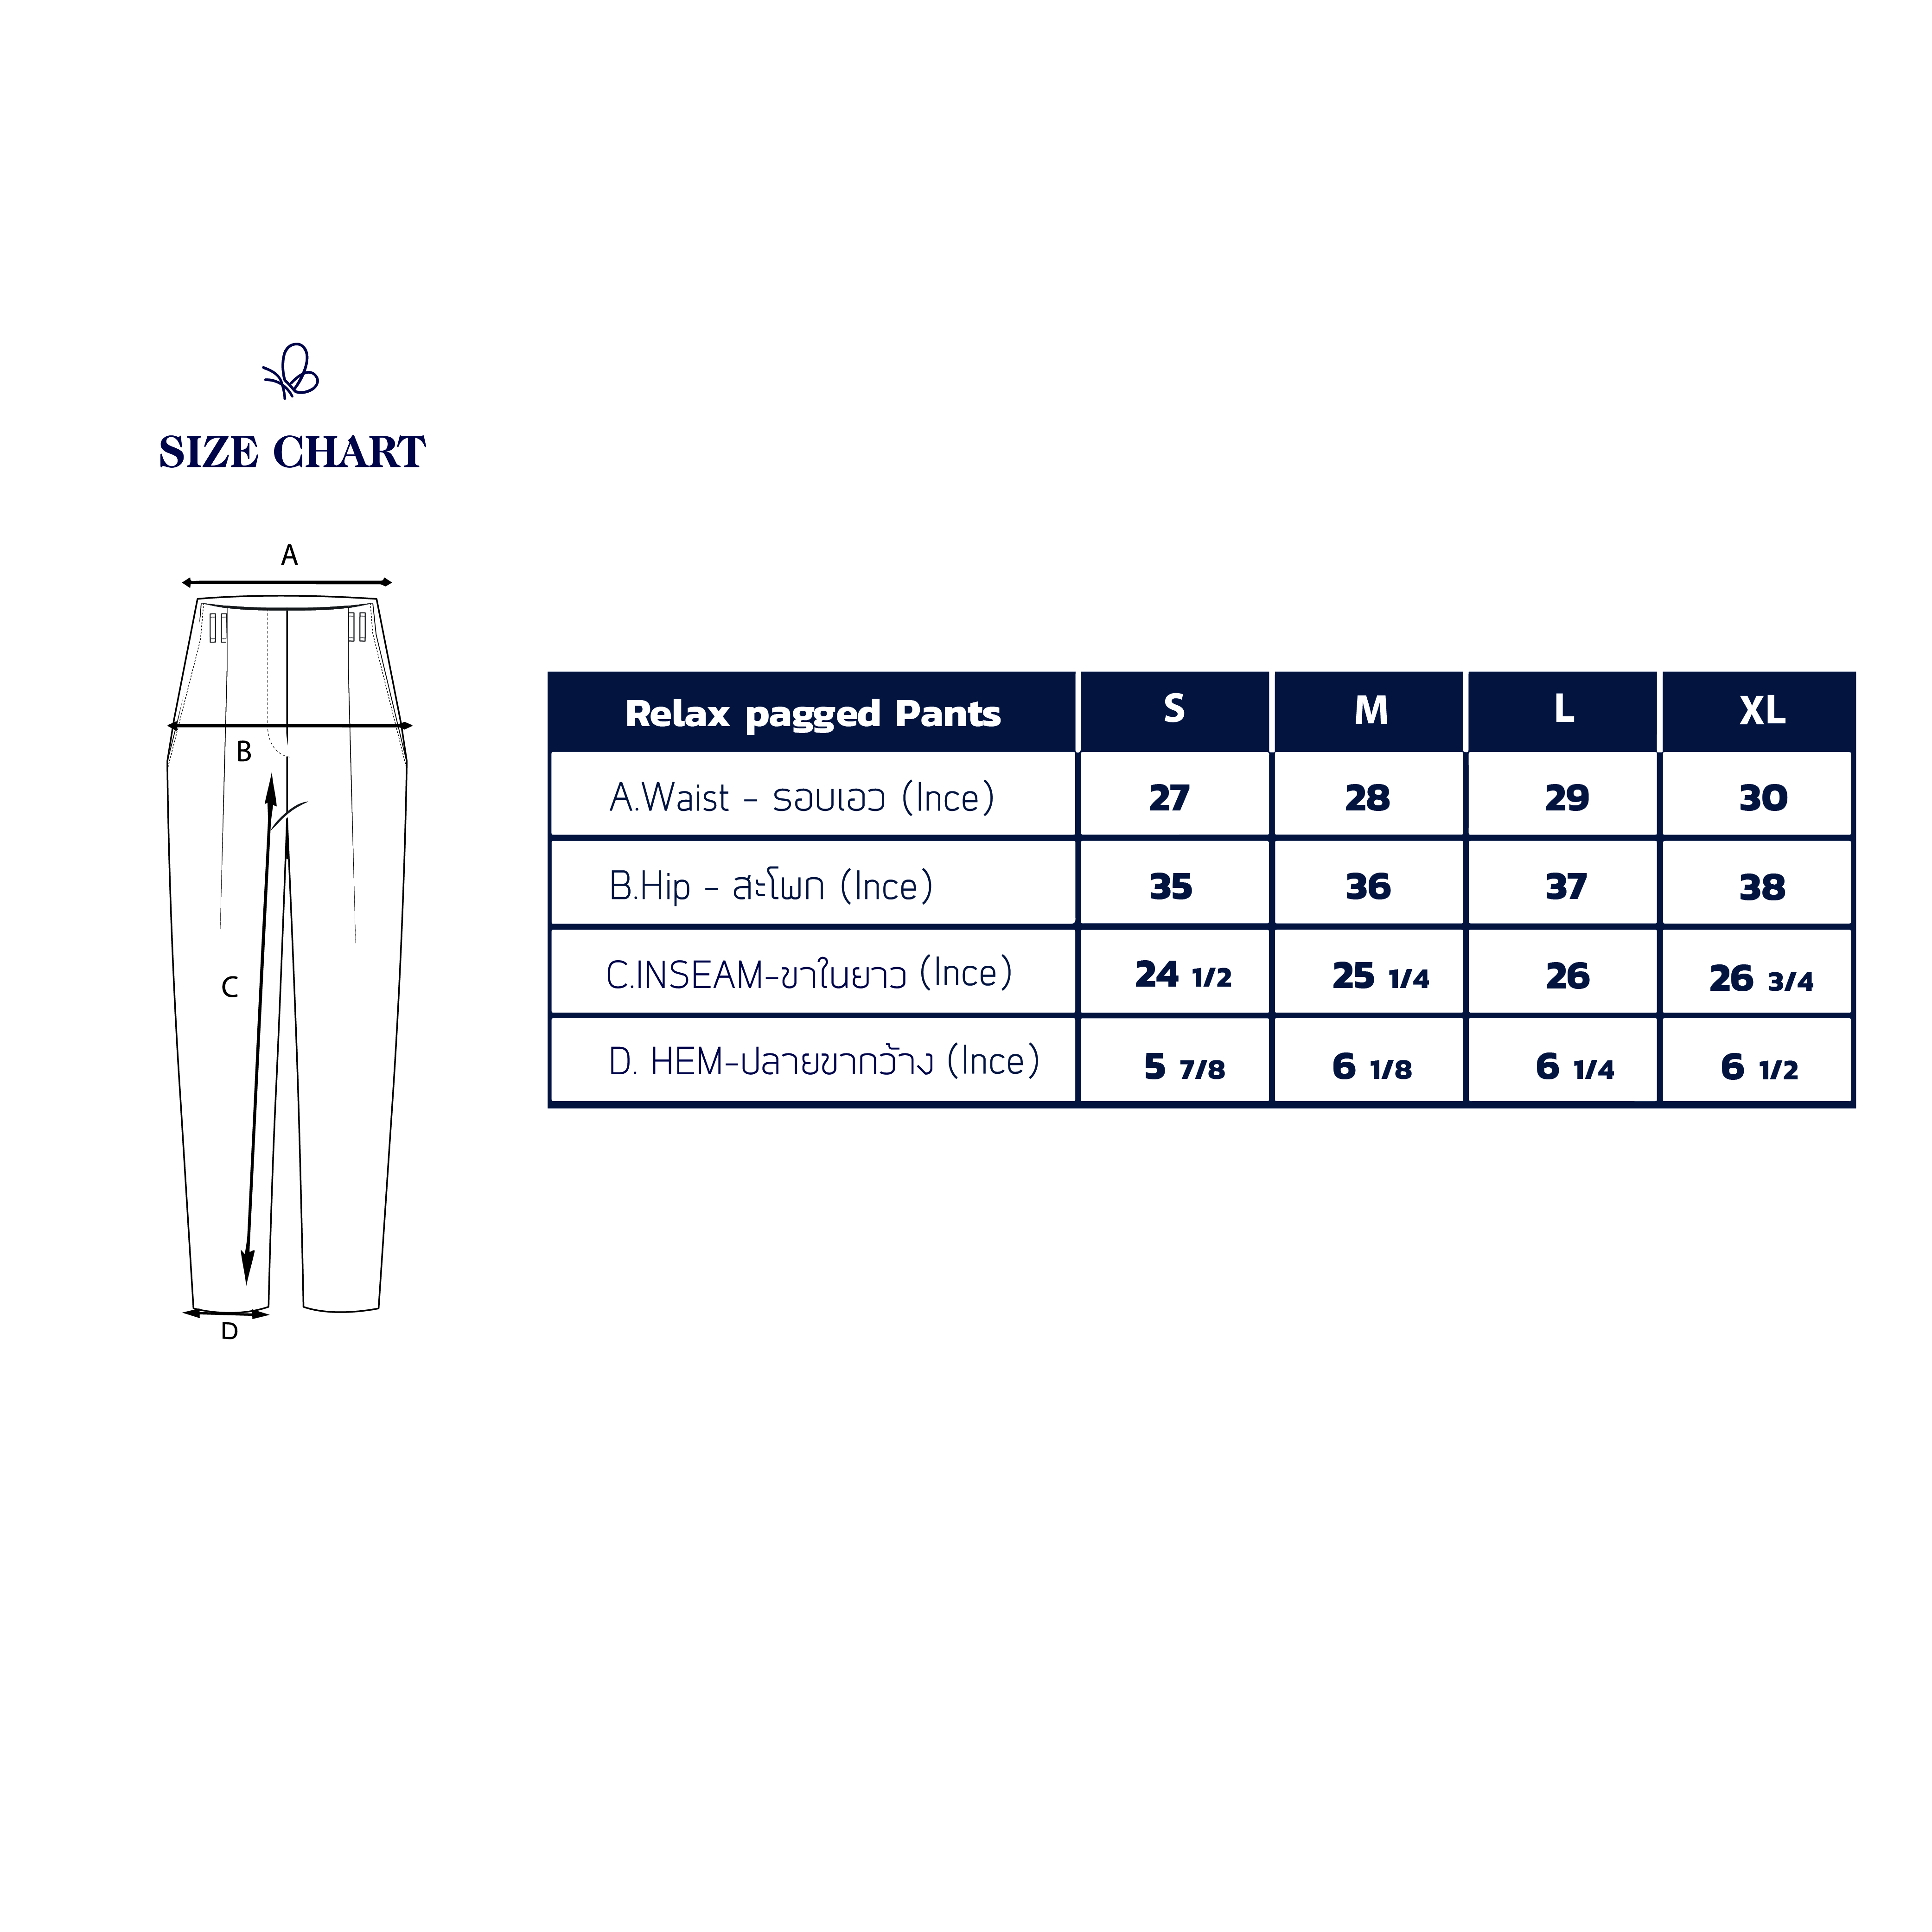 SIZE-Relax_pagged_Pants-new